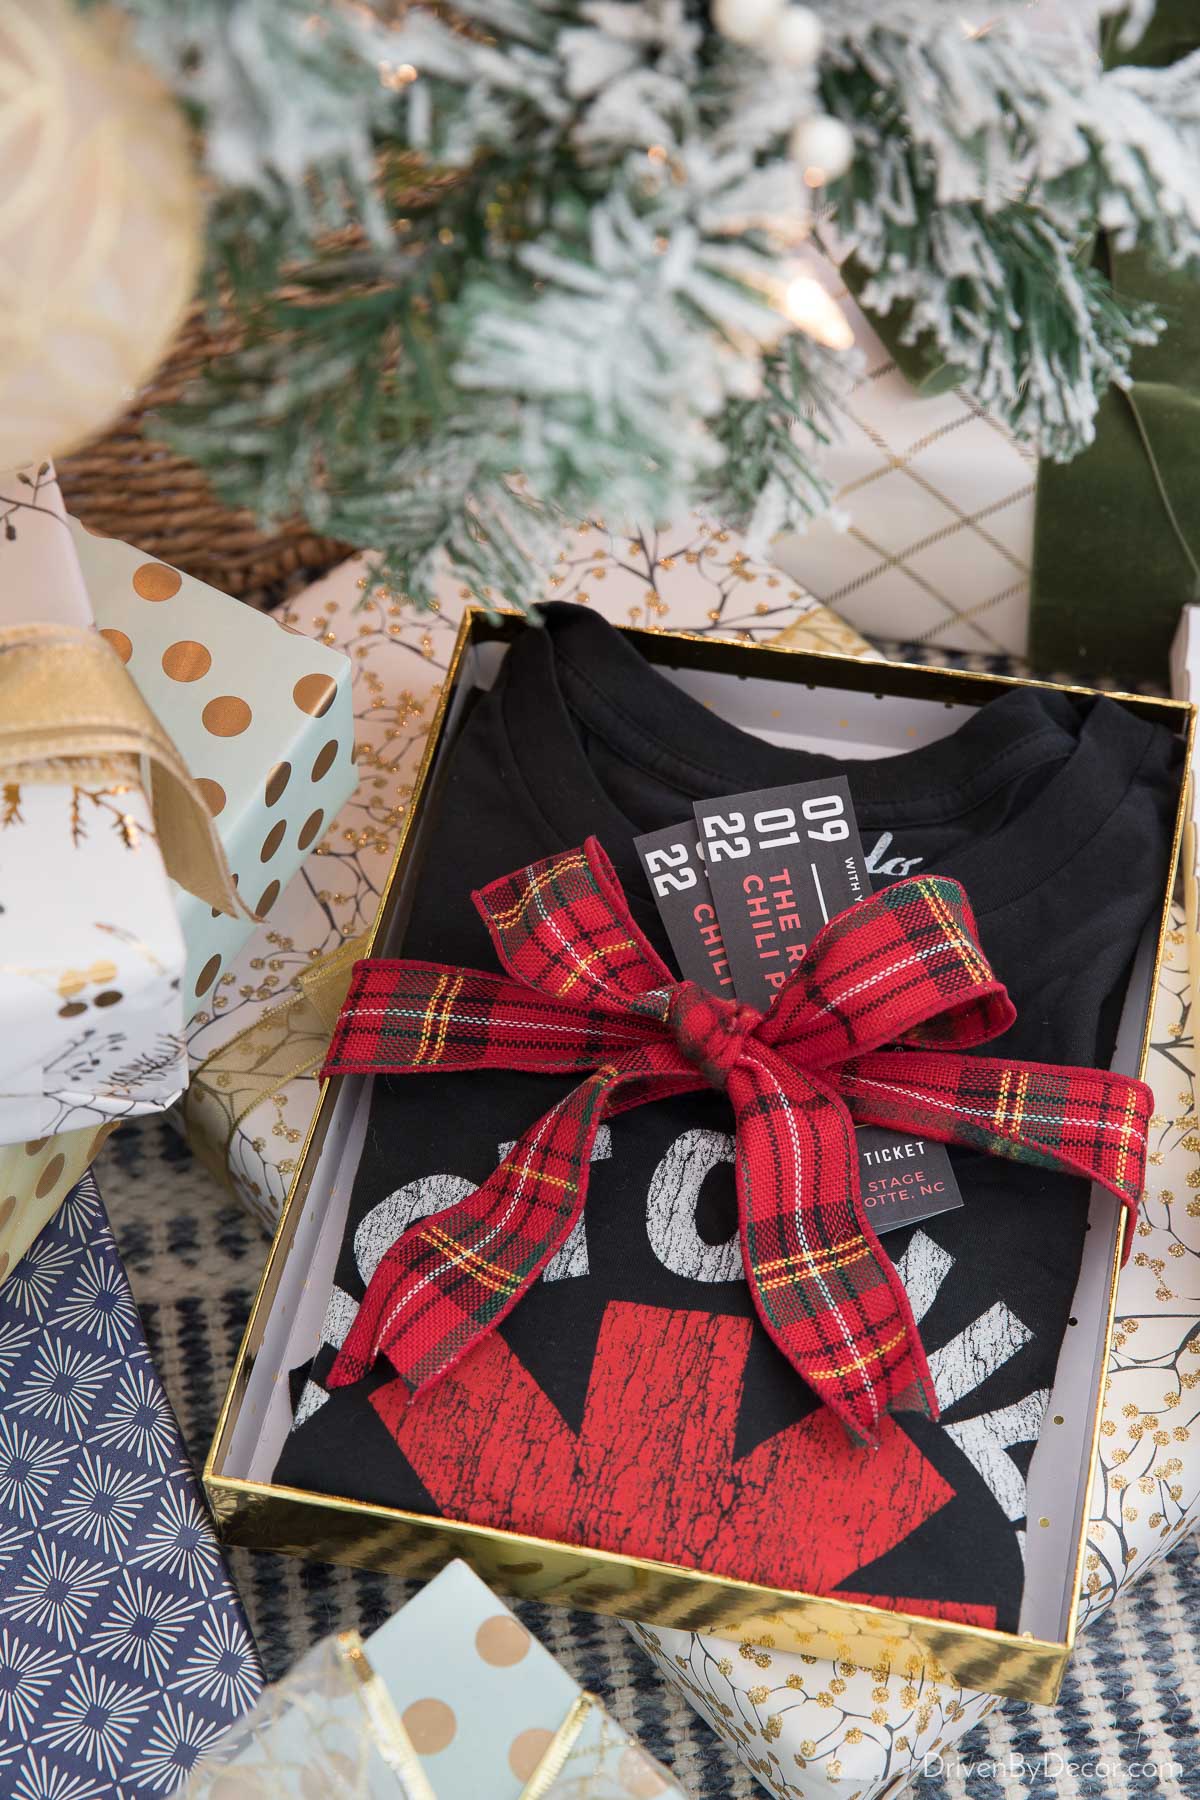 10 Holiday Gift Ideas for Couples (That They'll Love!) - Driven by Decor